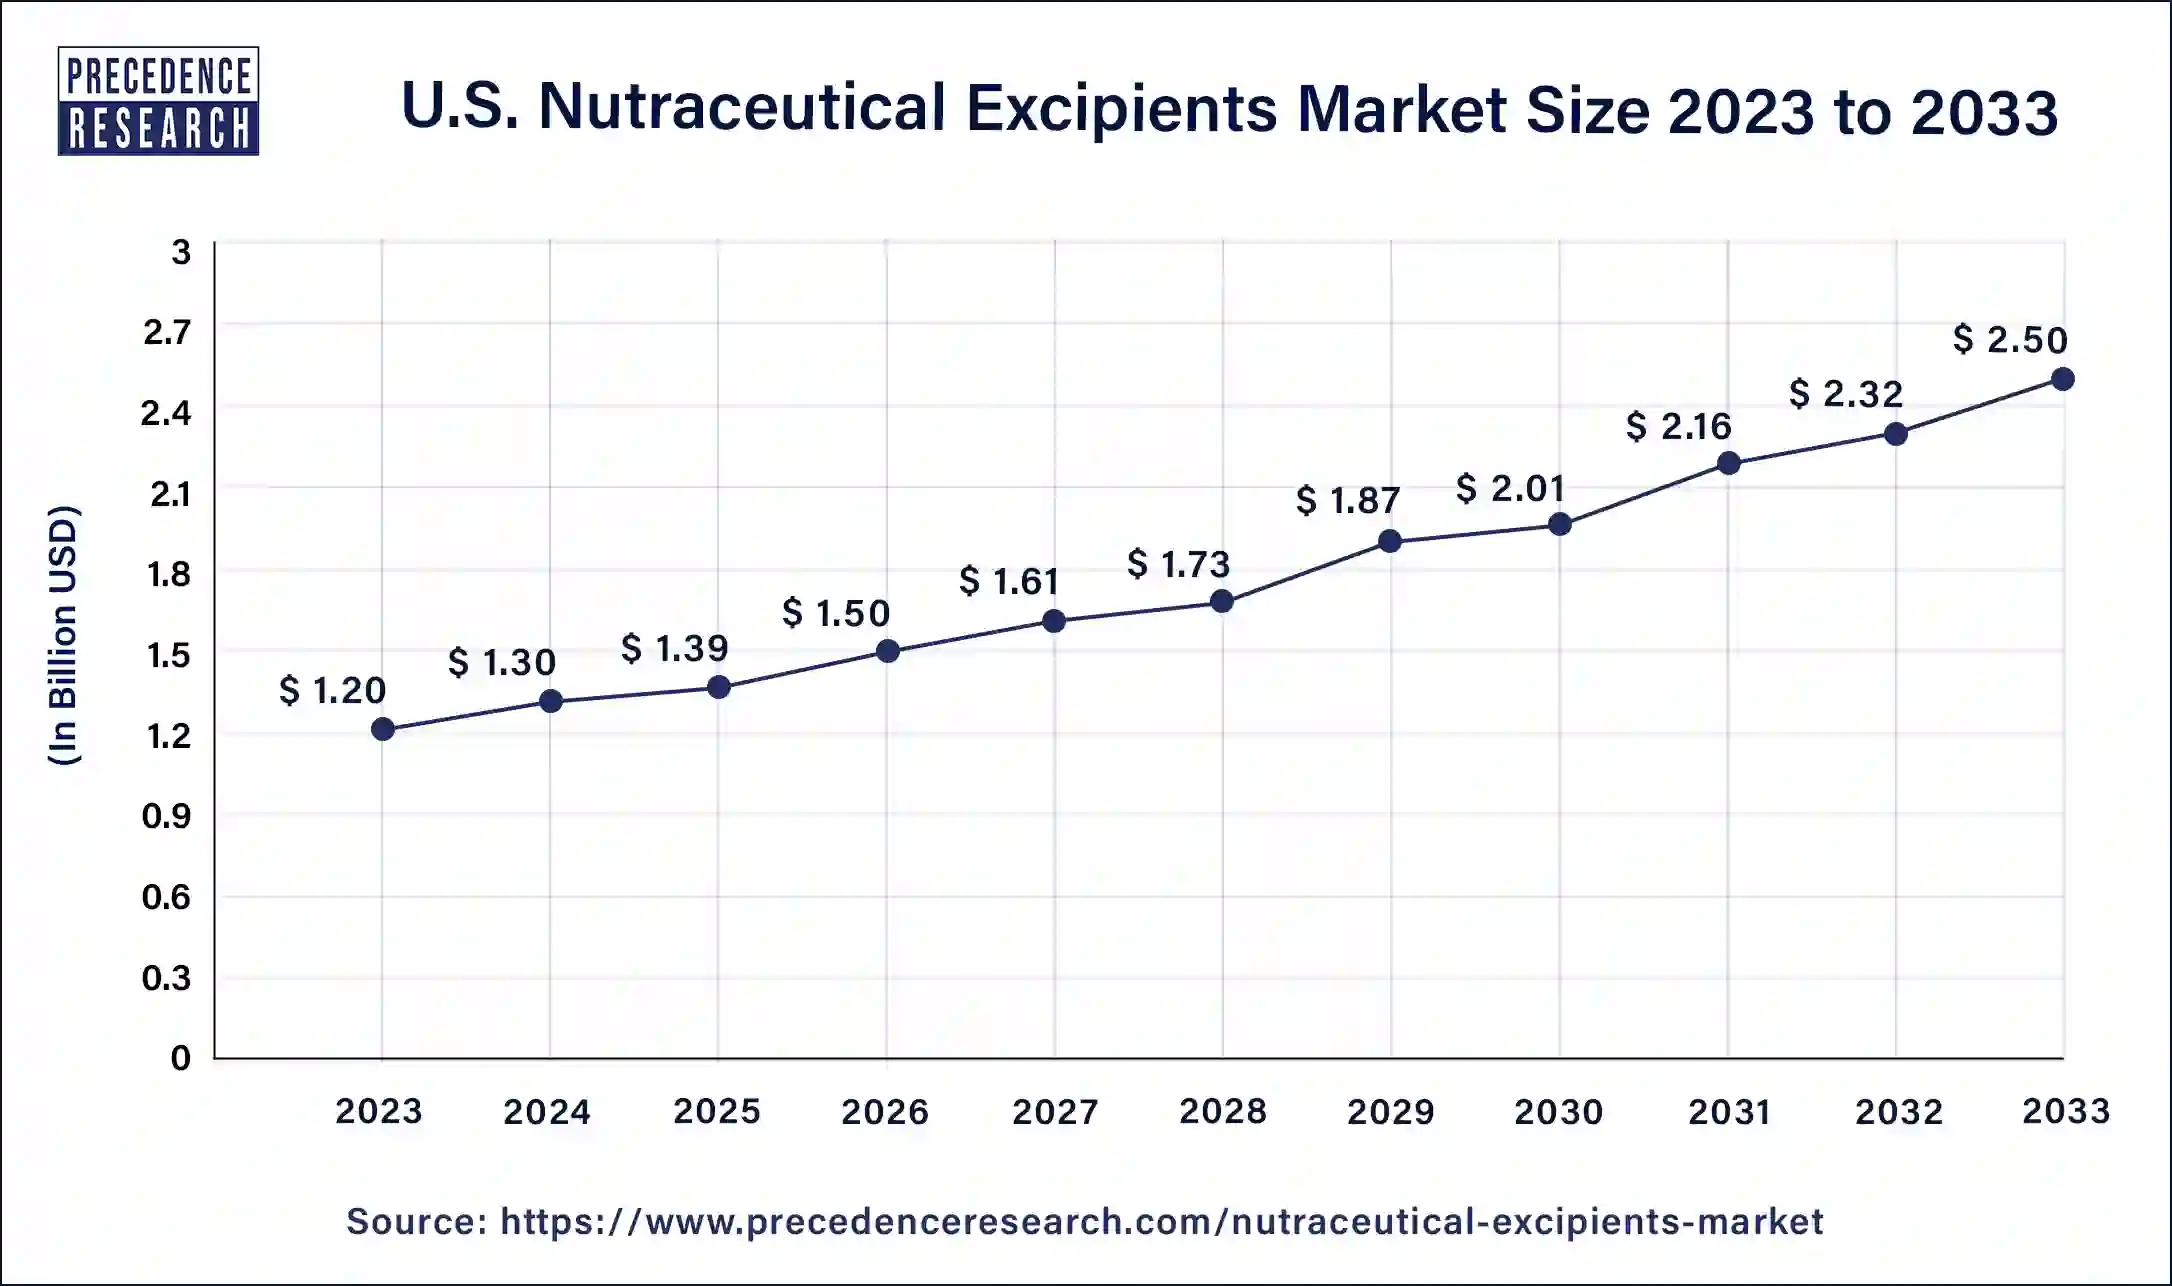 U.S. Nutraceutical Excipients Market Size 2024 to 2033